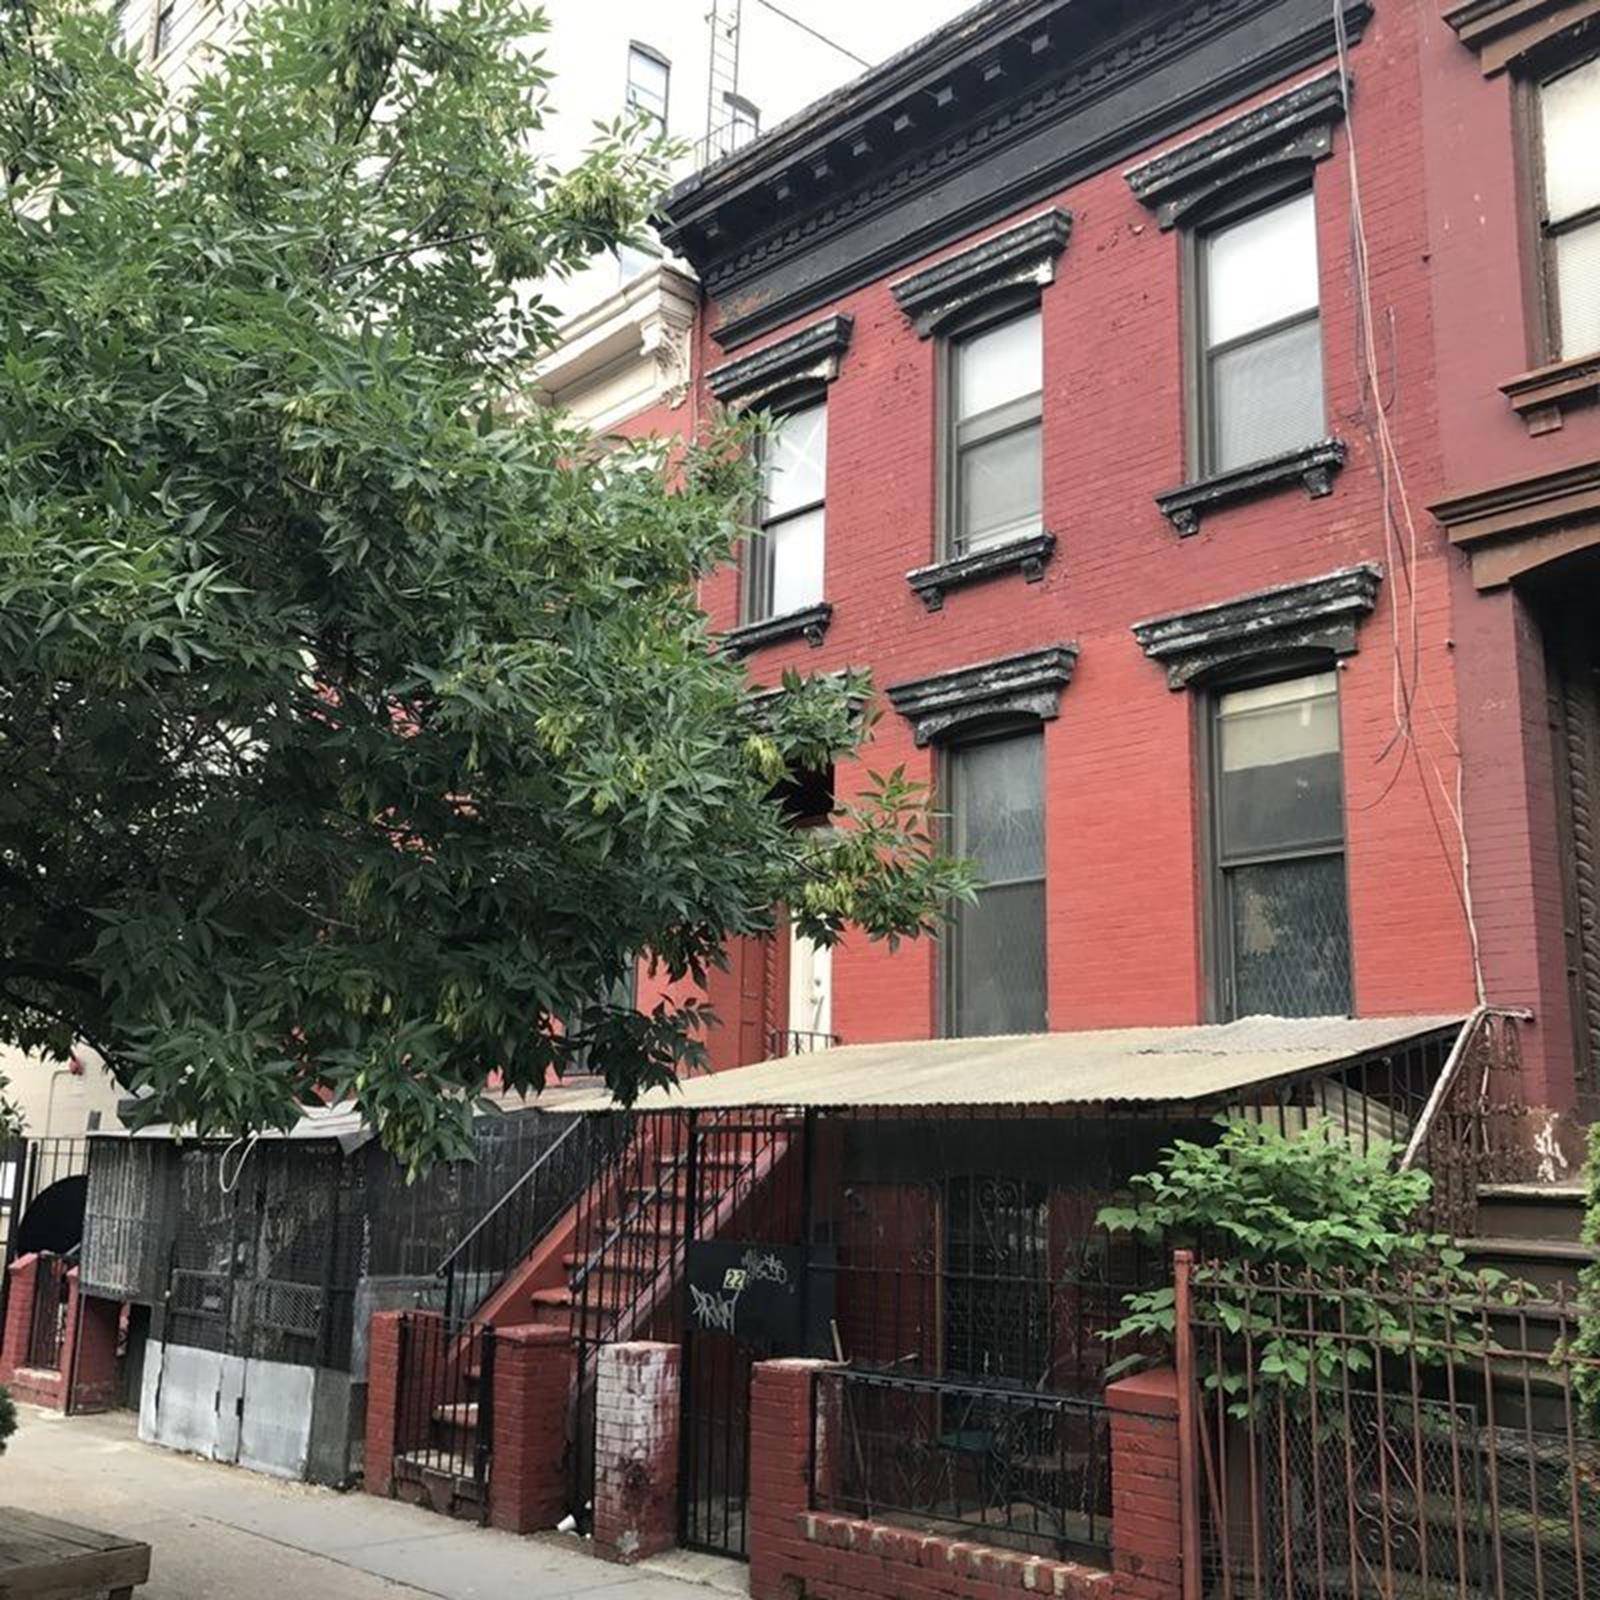 Prime development opportunity Currently set as a 3 family townhouse in need of some TLC in South Williamsburg, steps from transportation, restaurants, shopping and schools, and just minutes from Manhattan.